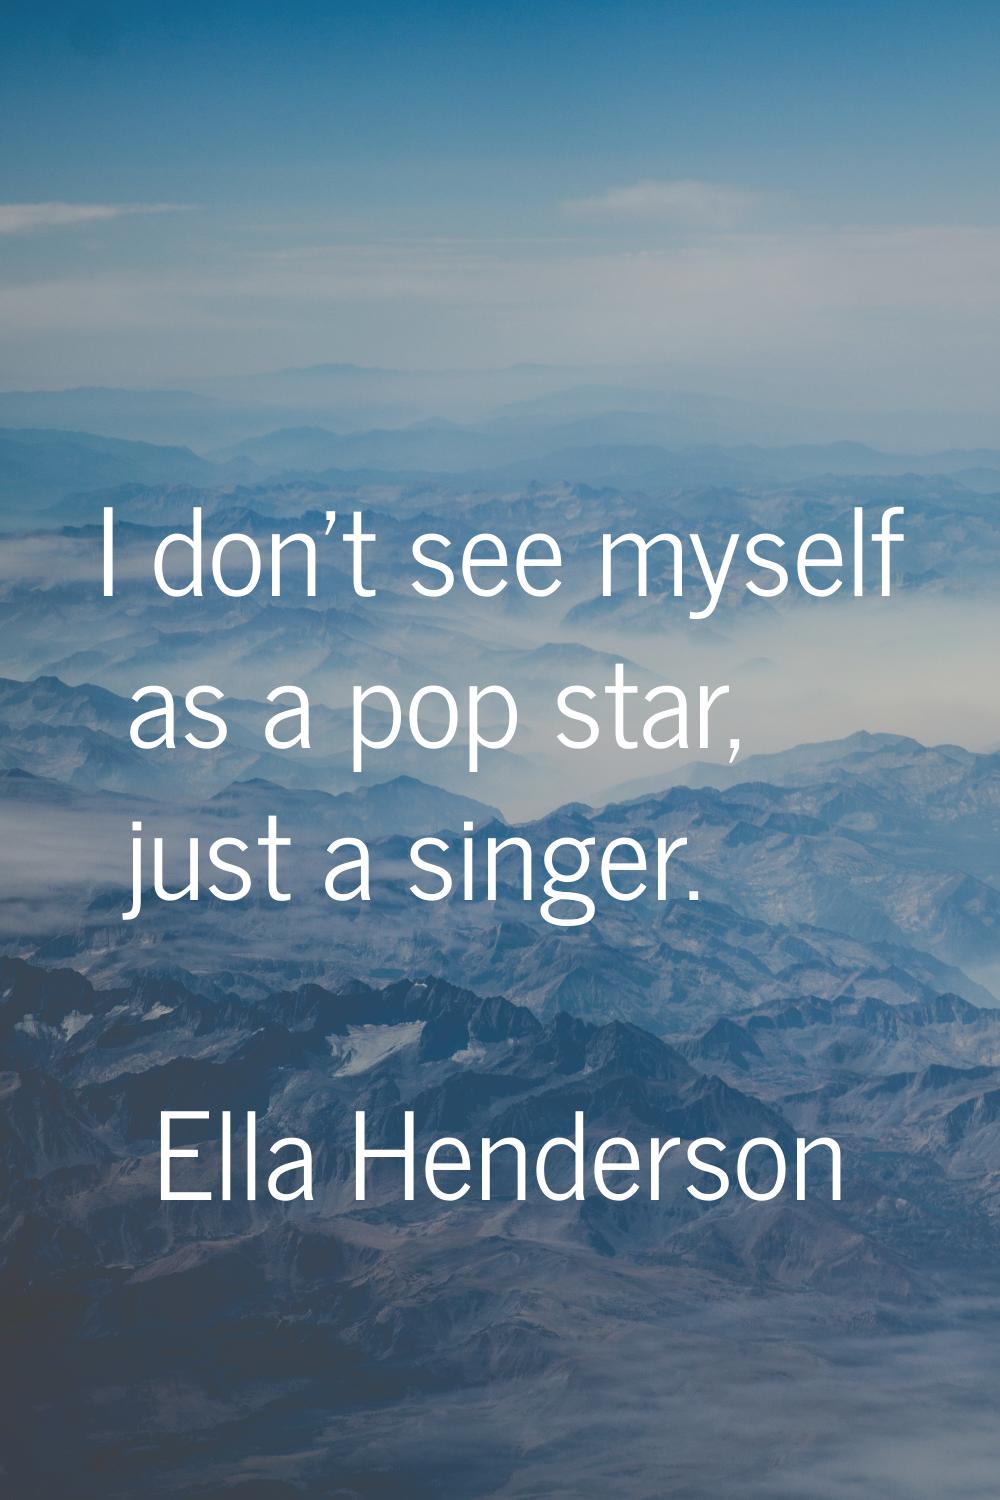 I don't see myself as a pop star, just a singer.